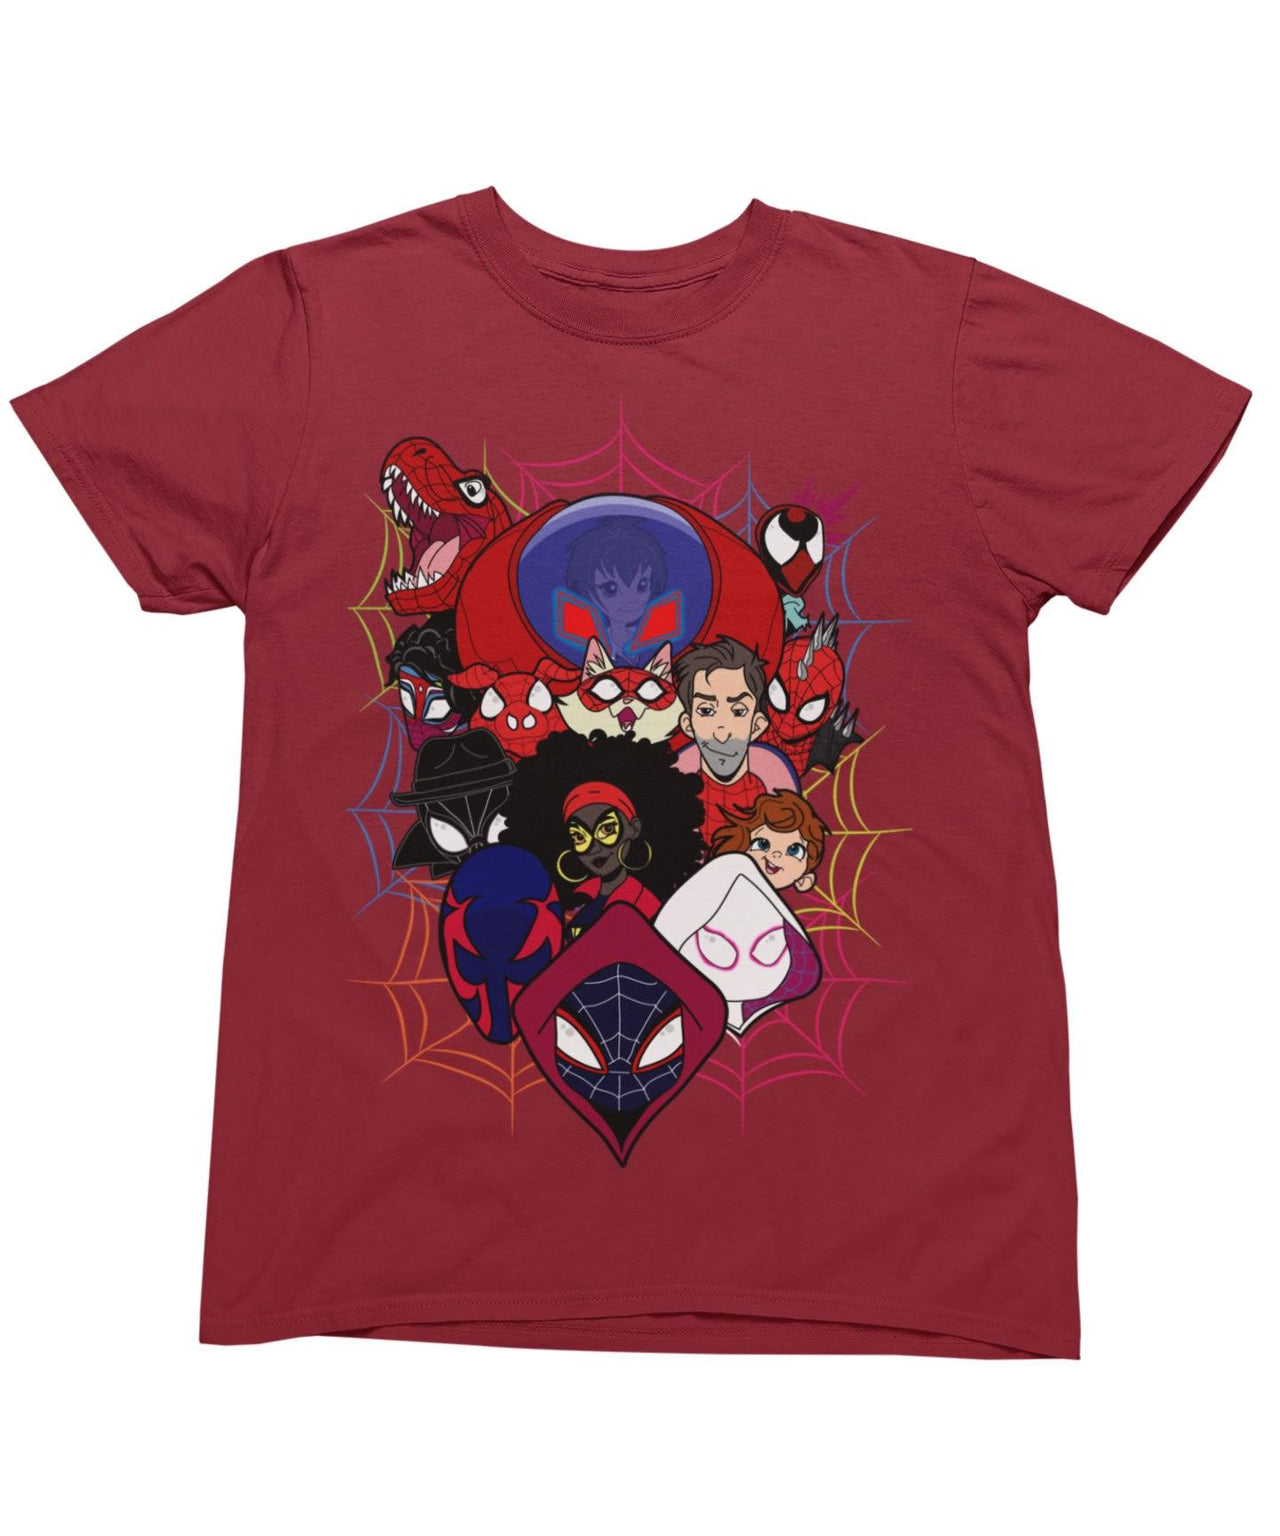 Top Notchy Spiderverse Explosion Men's/Unisex Mens Graphic T-Shirt 8Ball